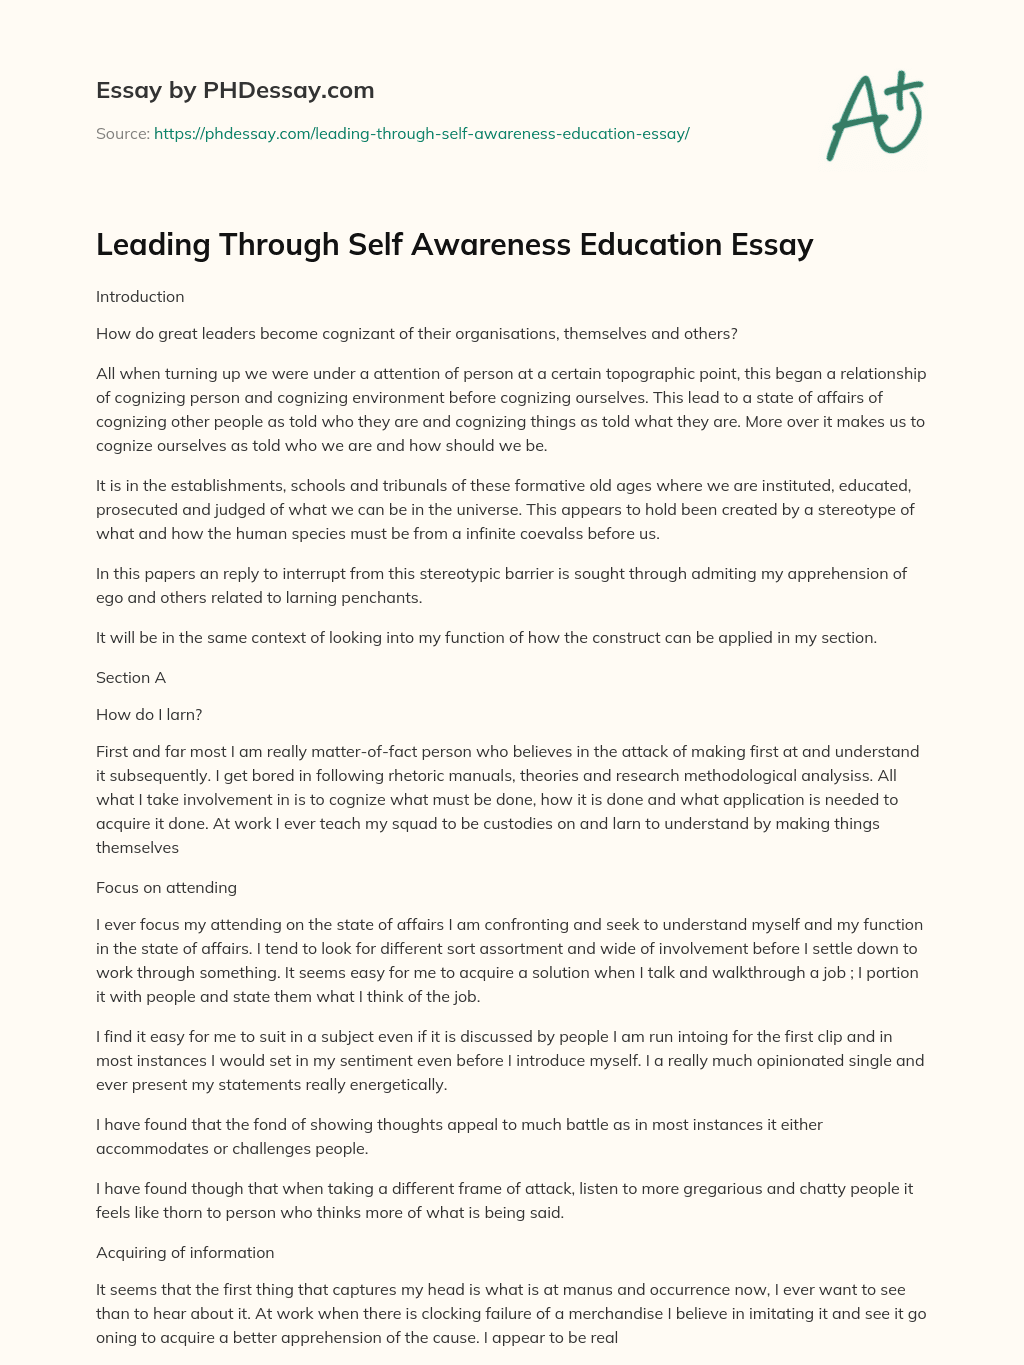 essay about my self awareness